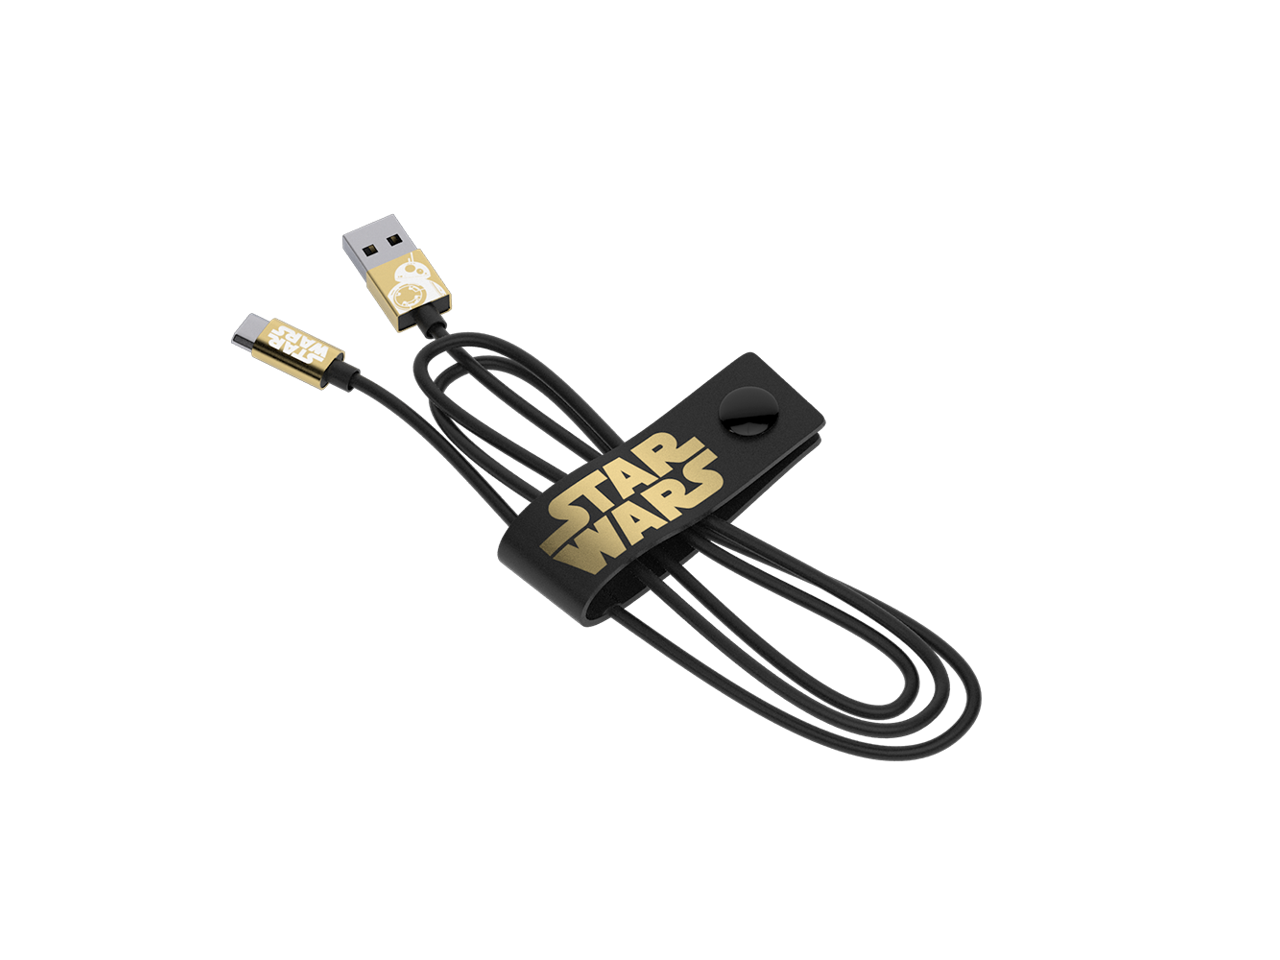 Star Wars TLJ BB-8 Gold Micro USB Cable 120cm - Limited Edition